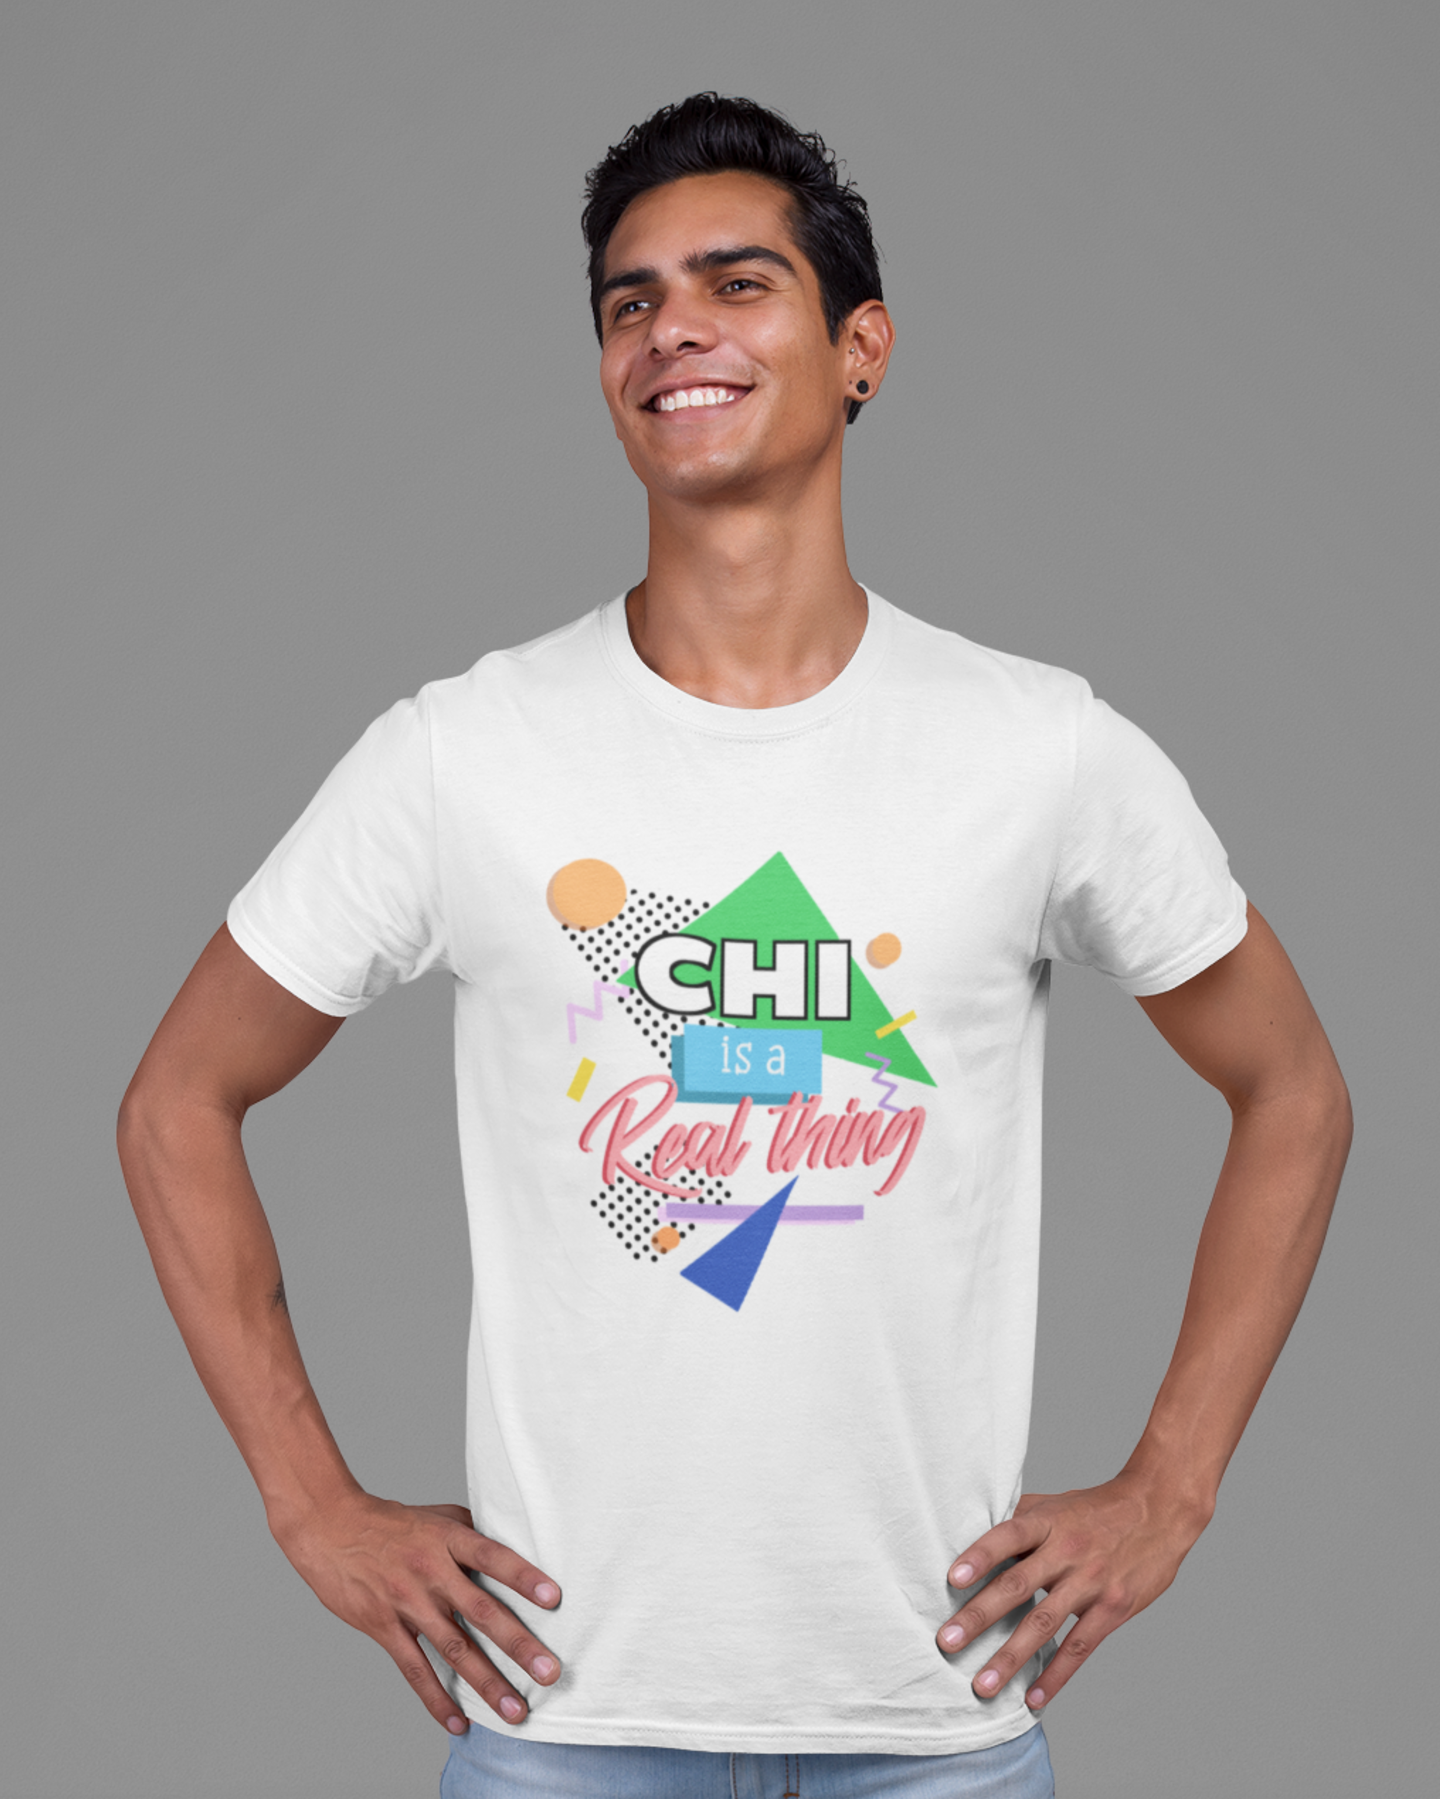 white t-shirt 'Chi is a real thing' design male model studio mockup